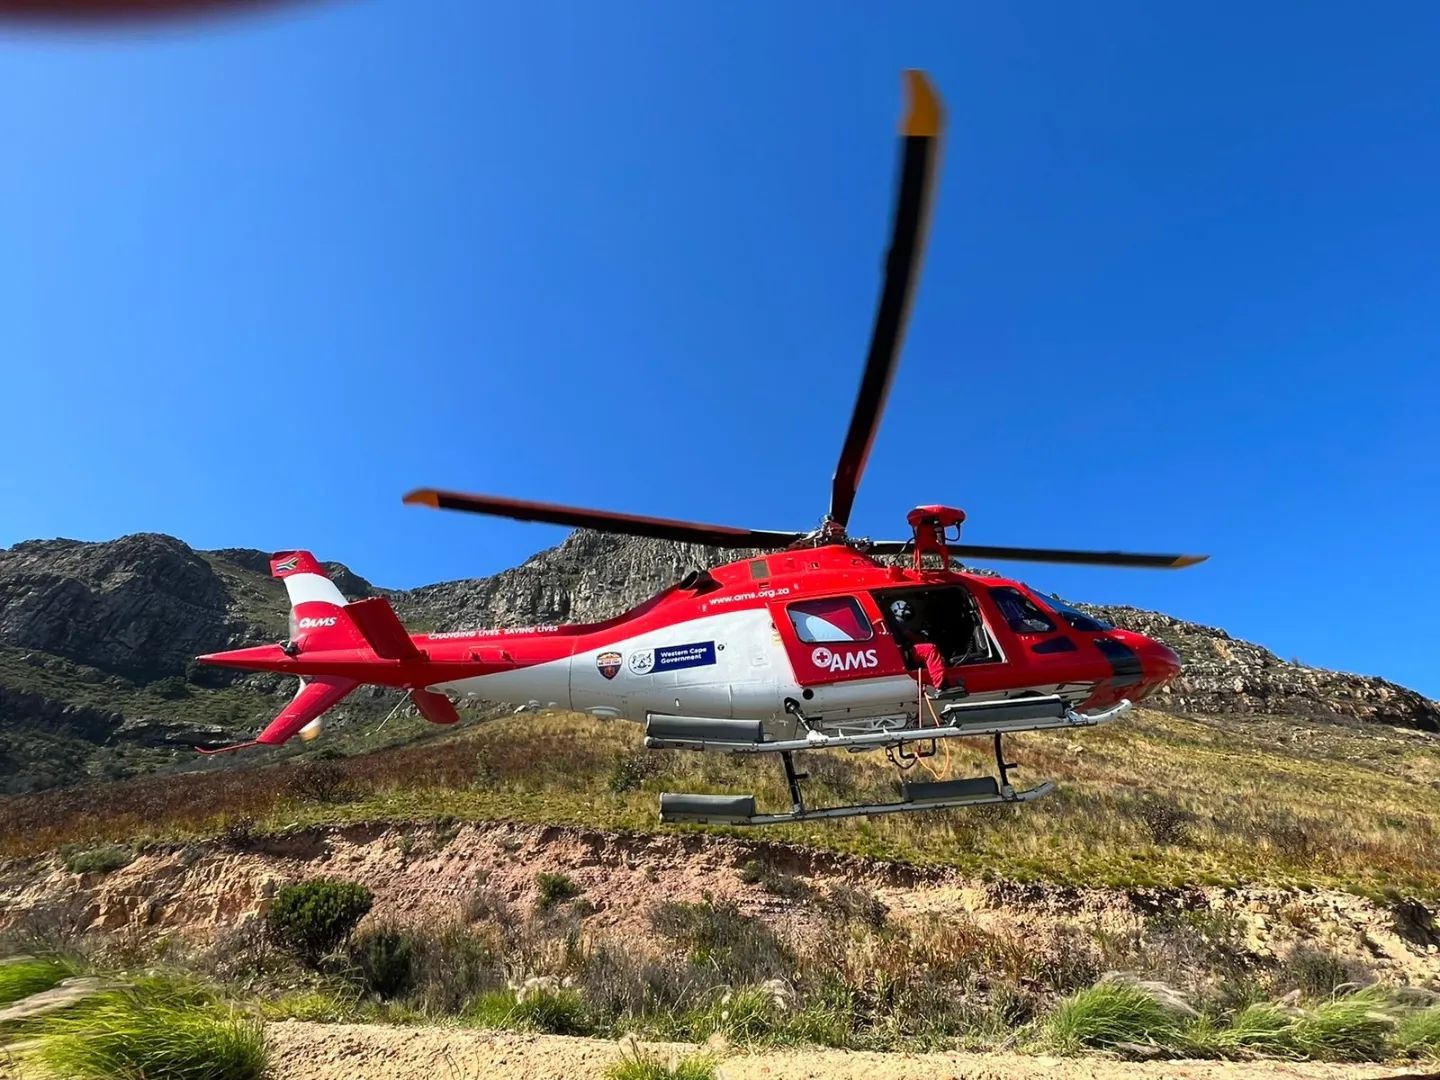 Body recovered near Rhodes Memorial, injured hiker airlifted from Newlands Forest